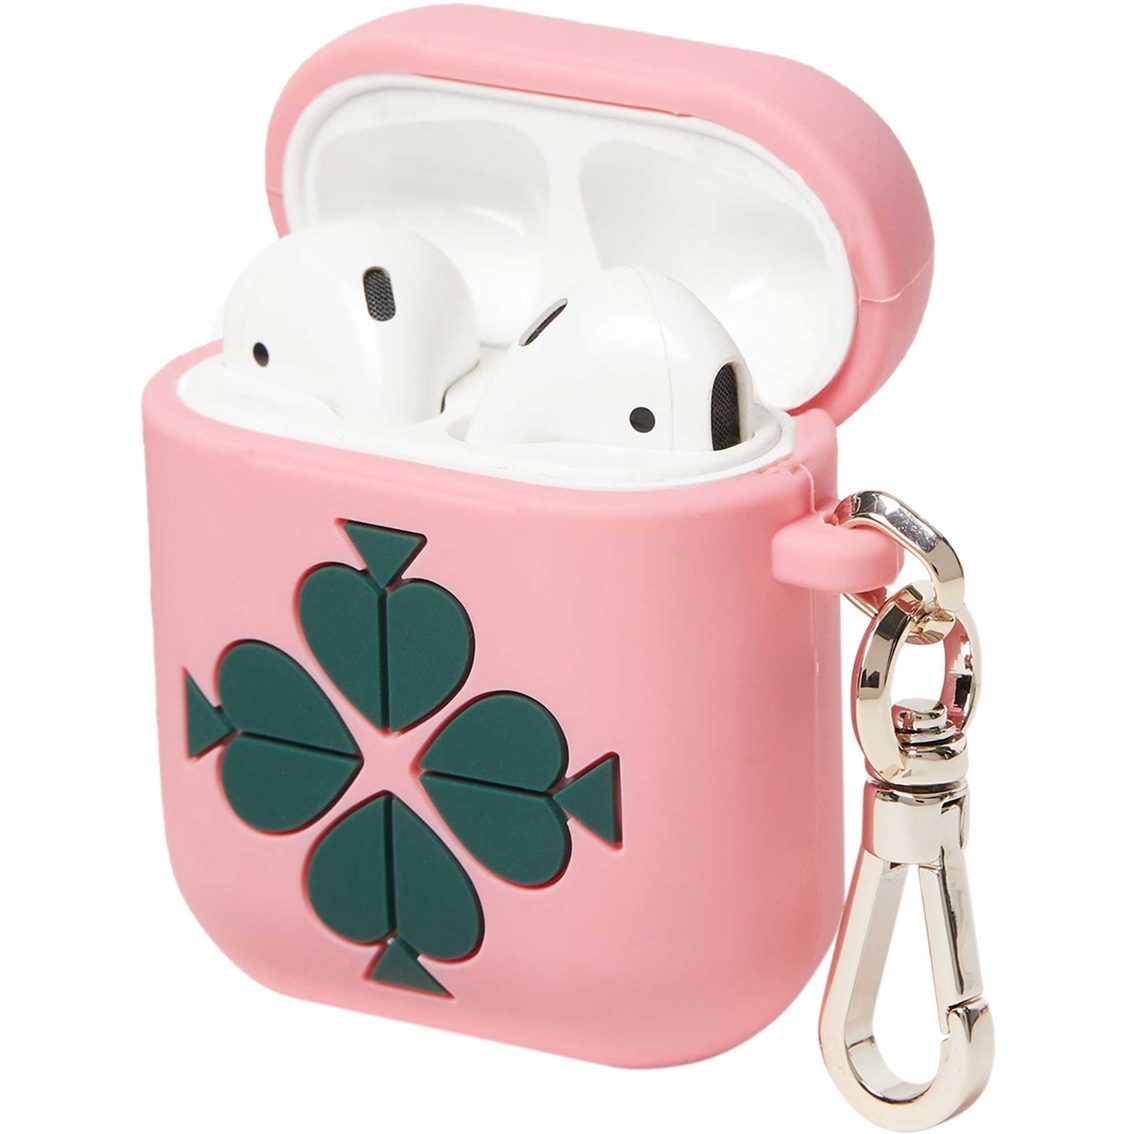 Kate Spade New York Airpod Case - Image 3 of 4